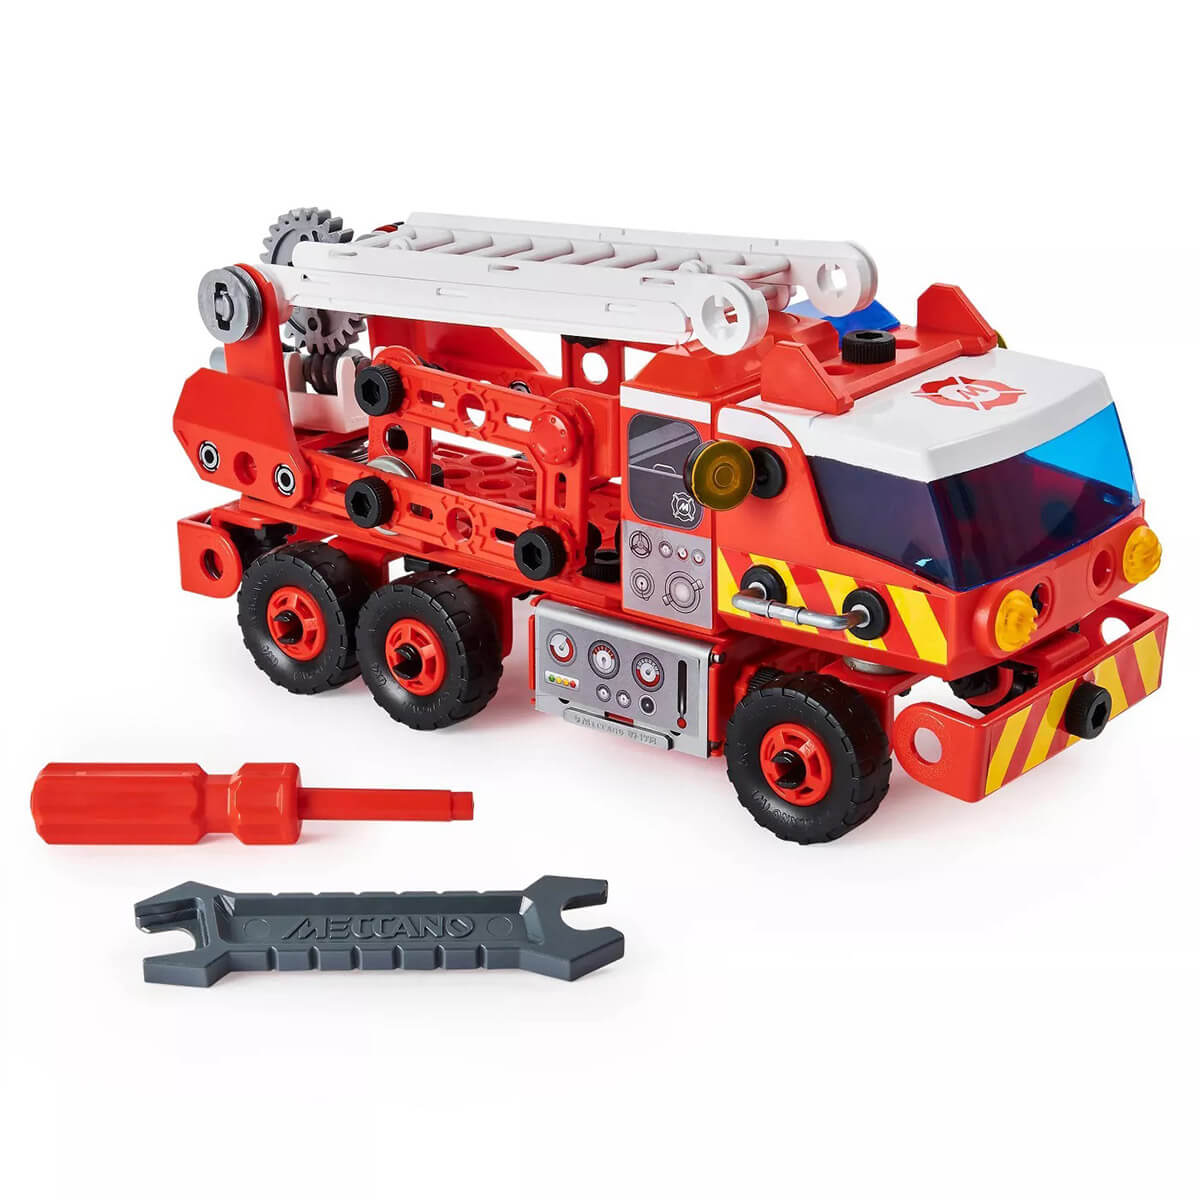 Erector by Meccano Discovery Rescue Fire Truck Lights and Sounds STEAM Building Kit